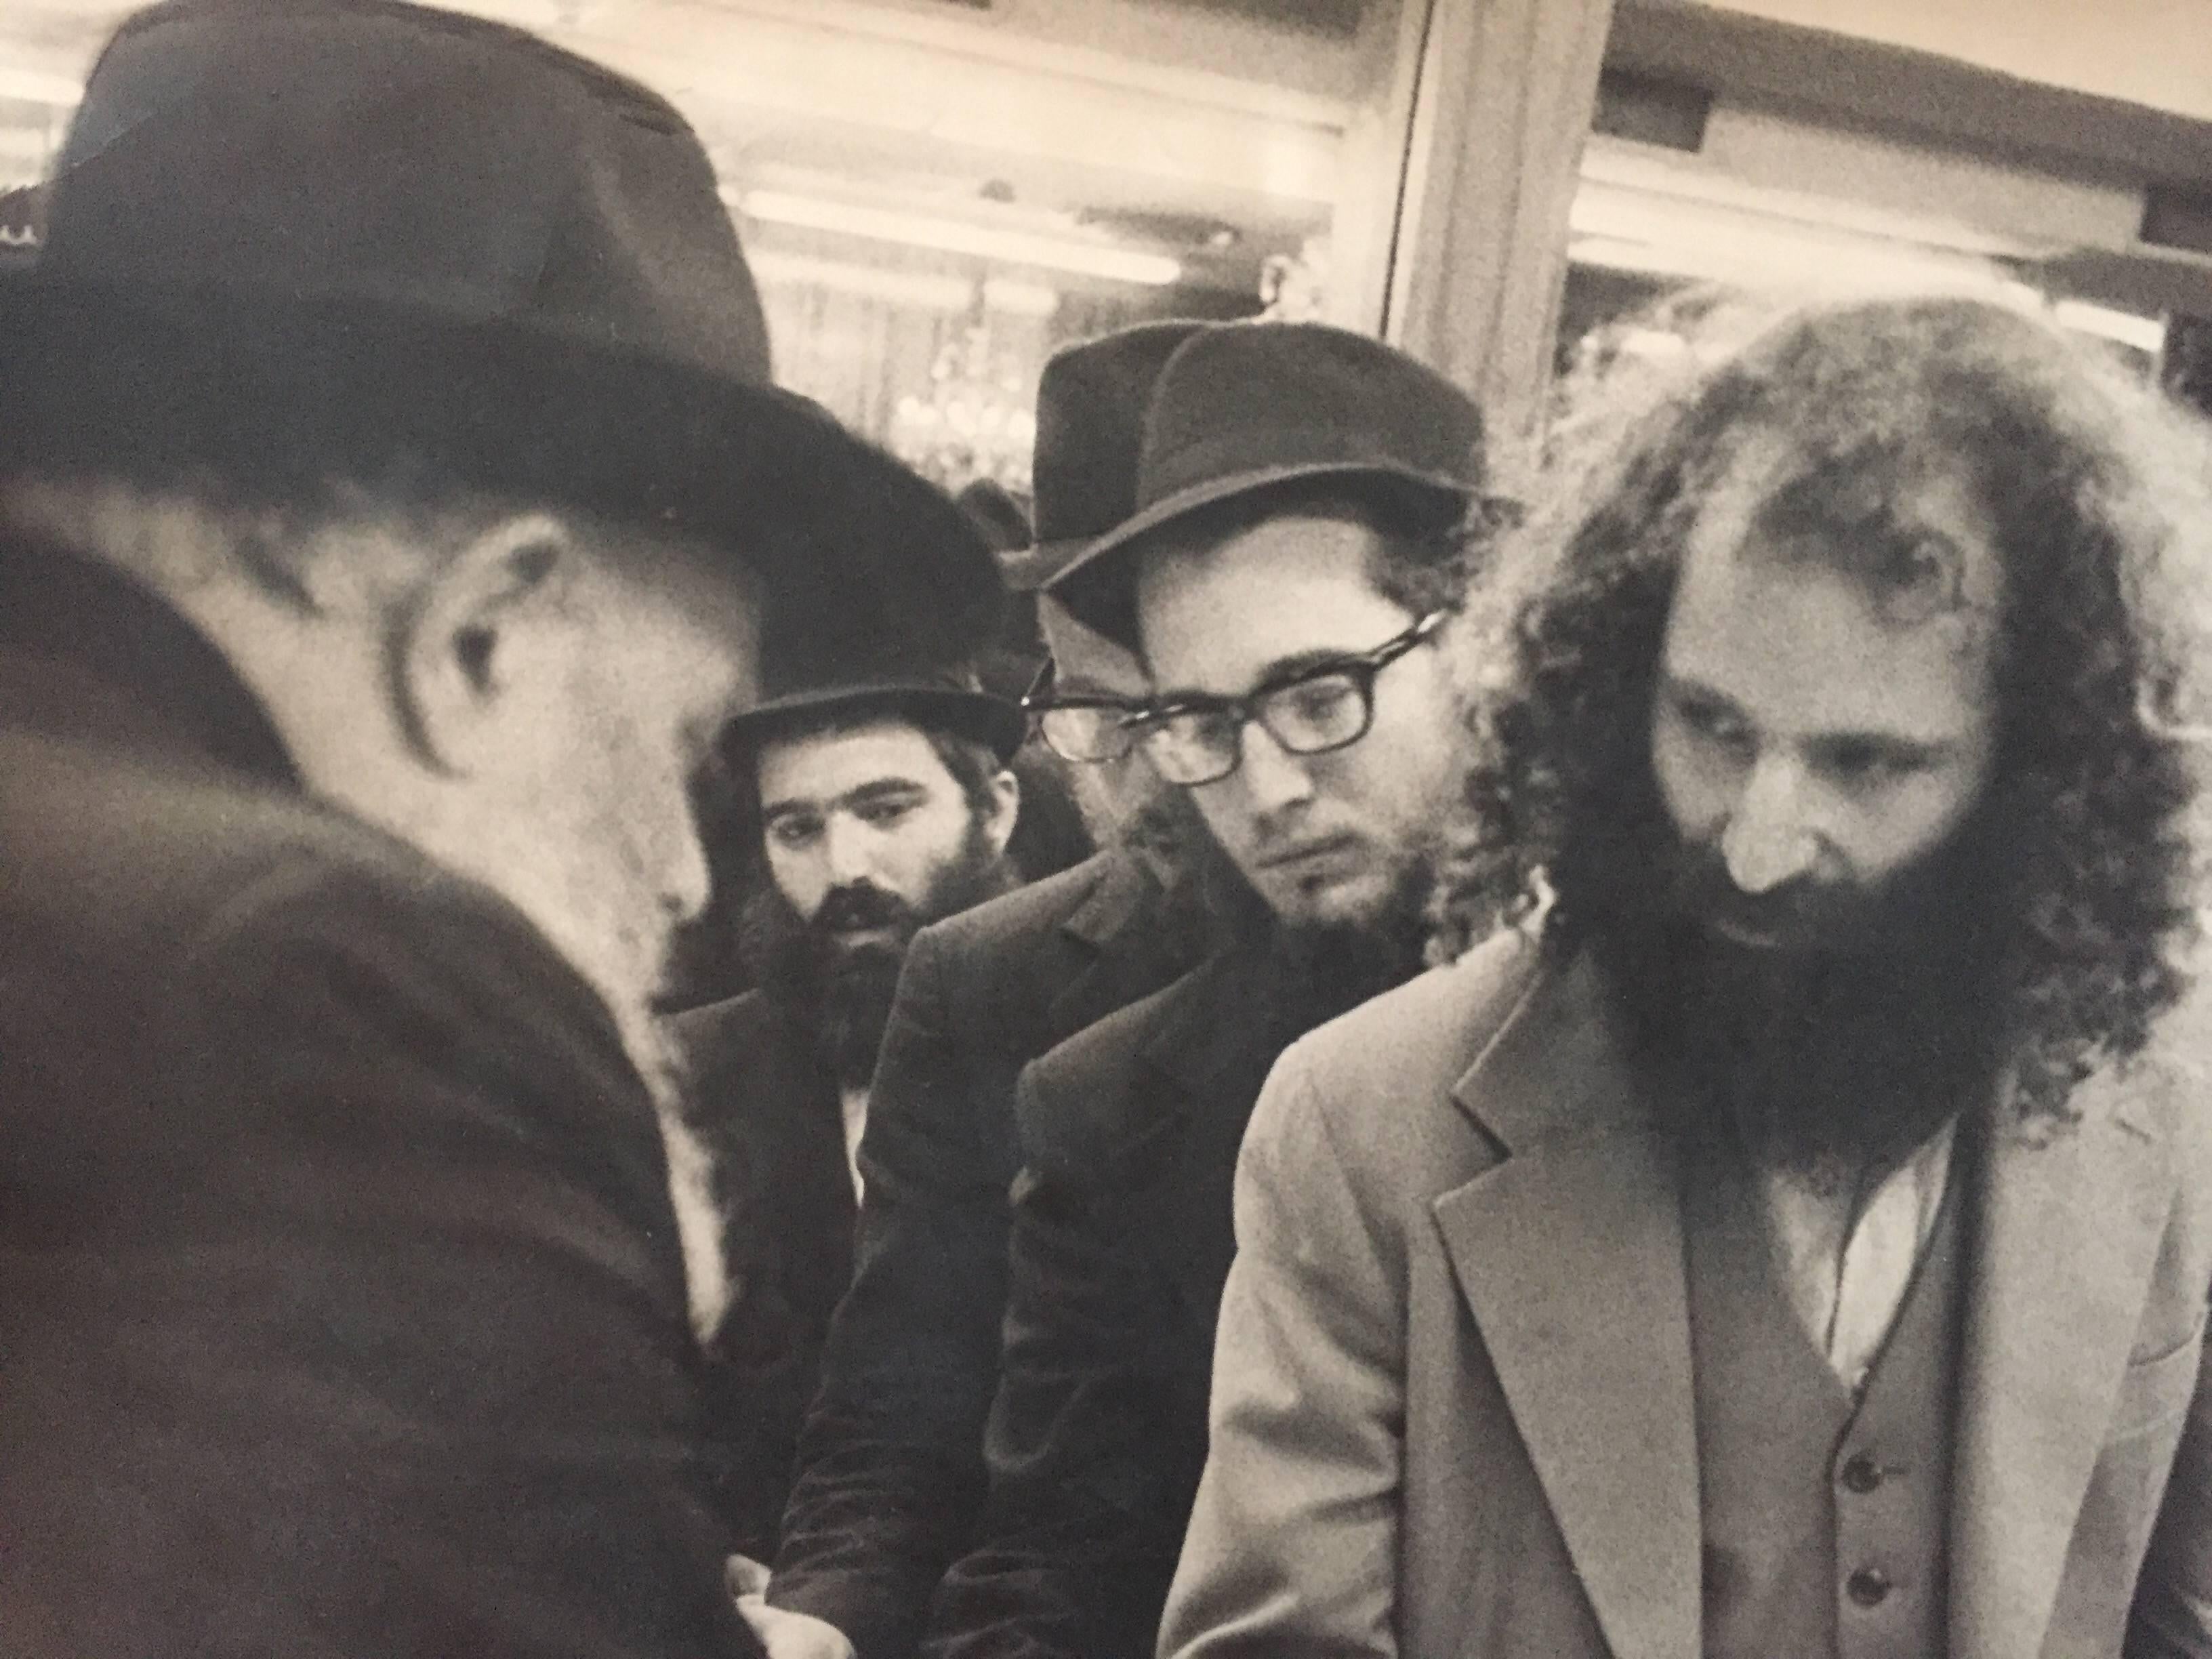 Rare Vintage Original Photo from the Court of The Lubavitcher Rebbe at 770 - Photograph by Levi Yitzchak Freidin